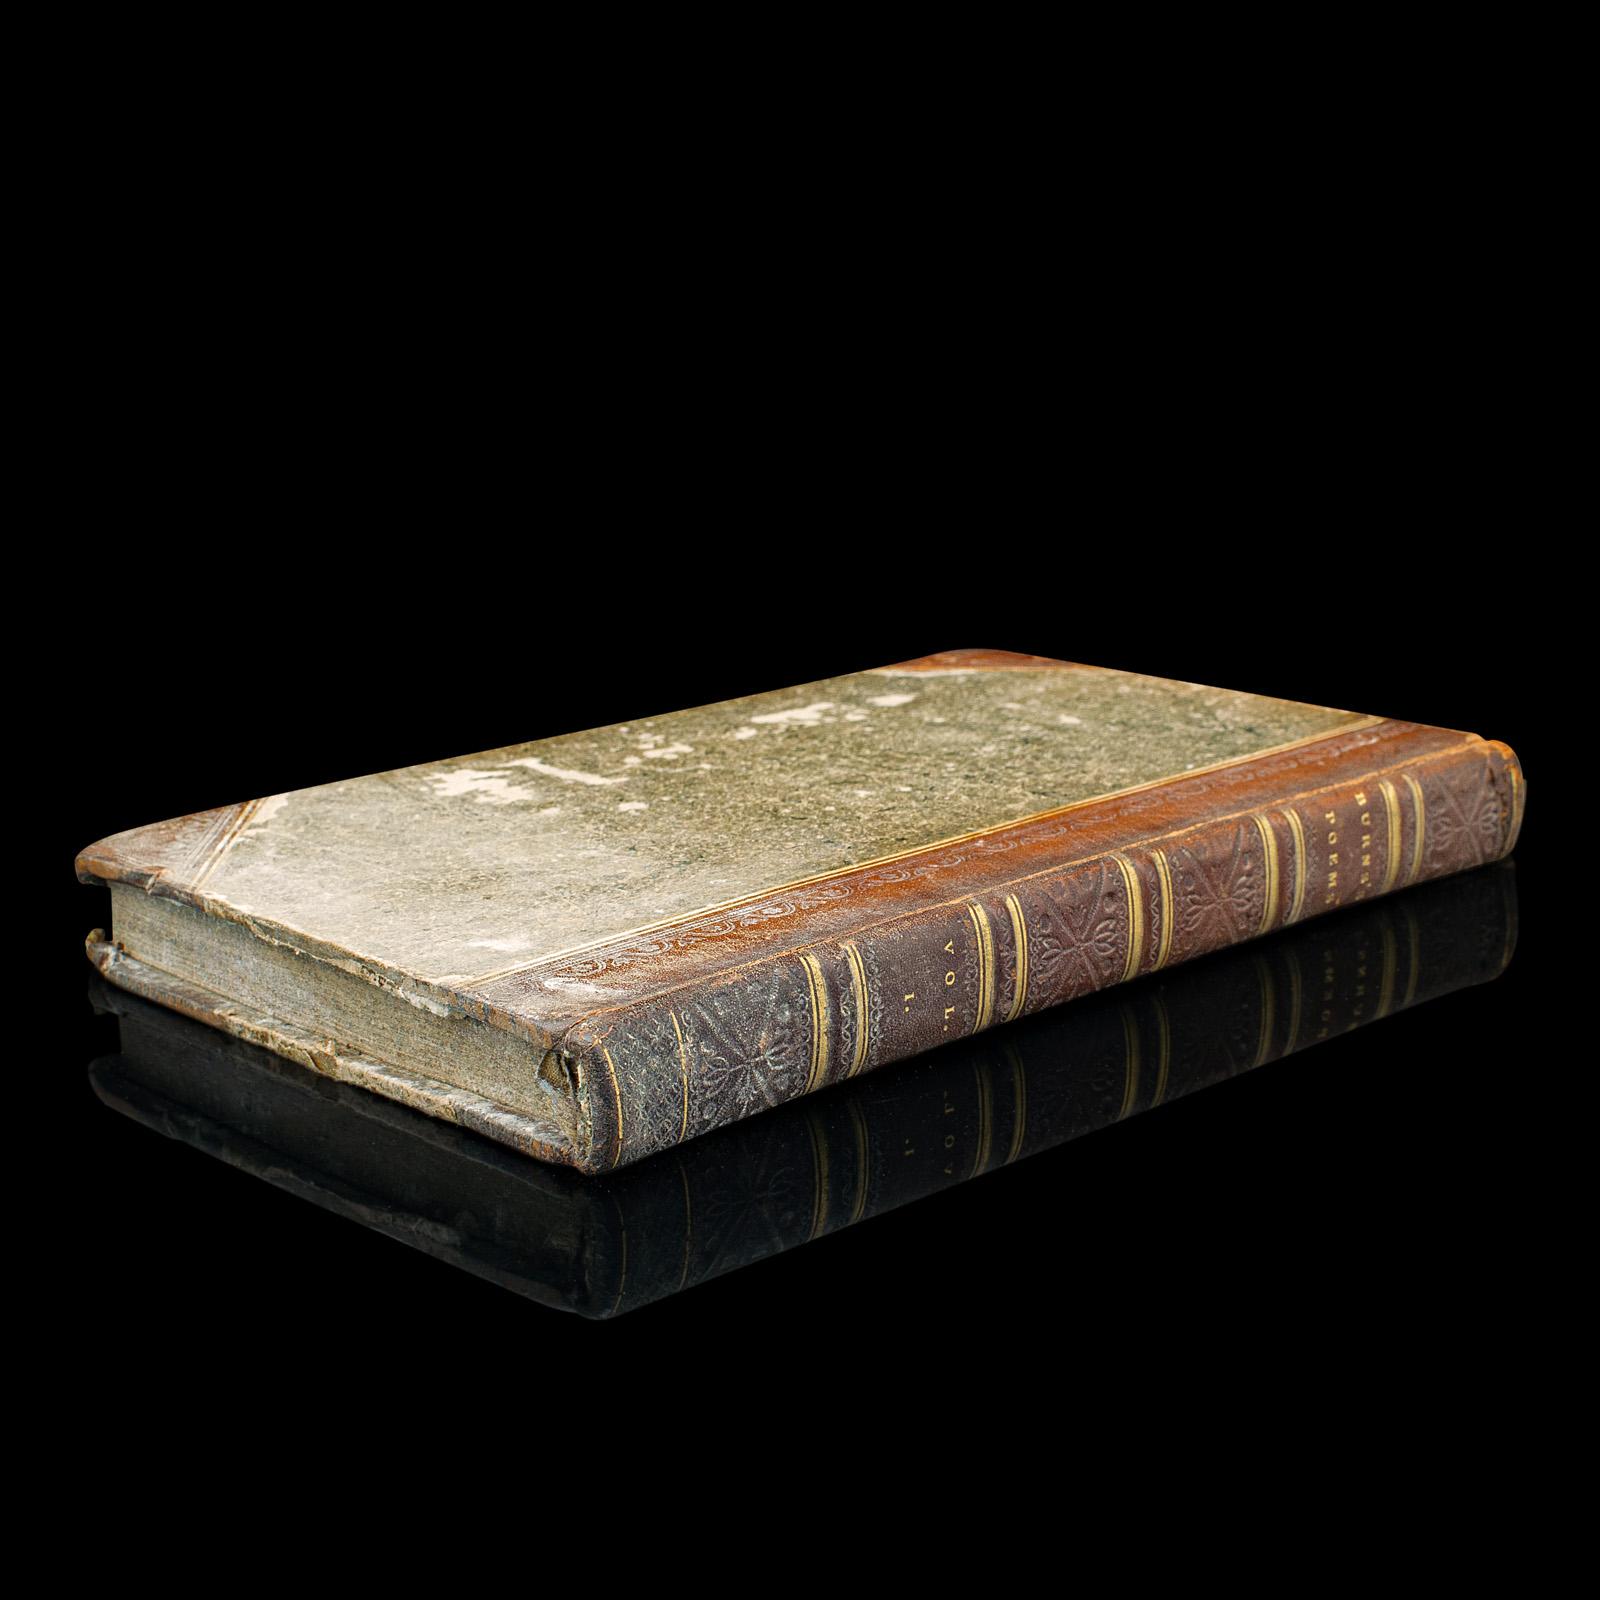 This is an antique copy of Poems, Chiefly in the Scottish Dialect by Robert Burns. A Scots English language hard bound poetry book, dating to the Georgian period, published 1813.

Celebrated world-wide and considered Scotland's national poet, Robert